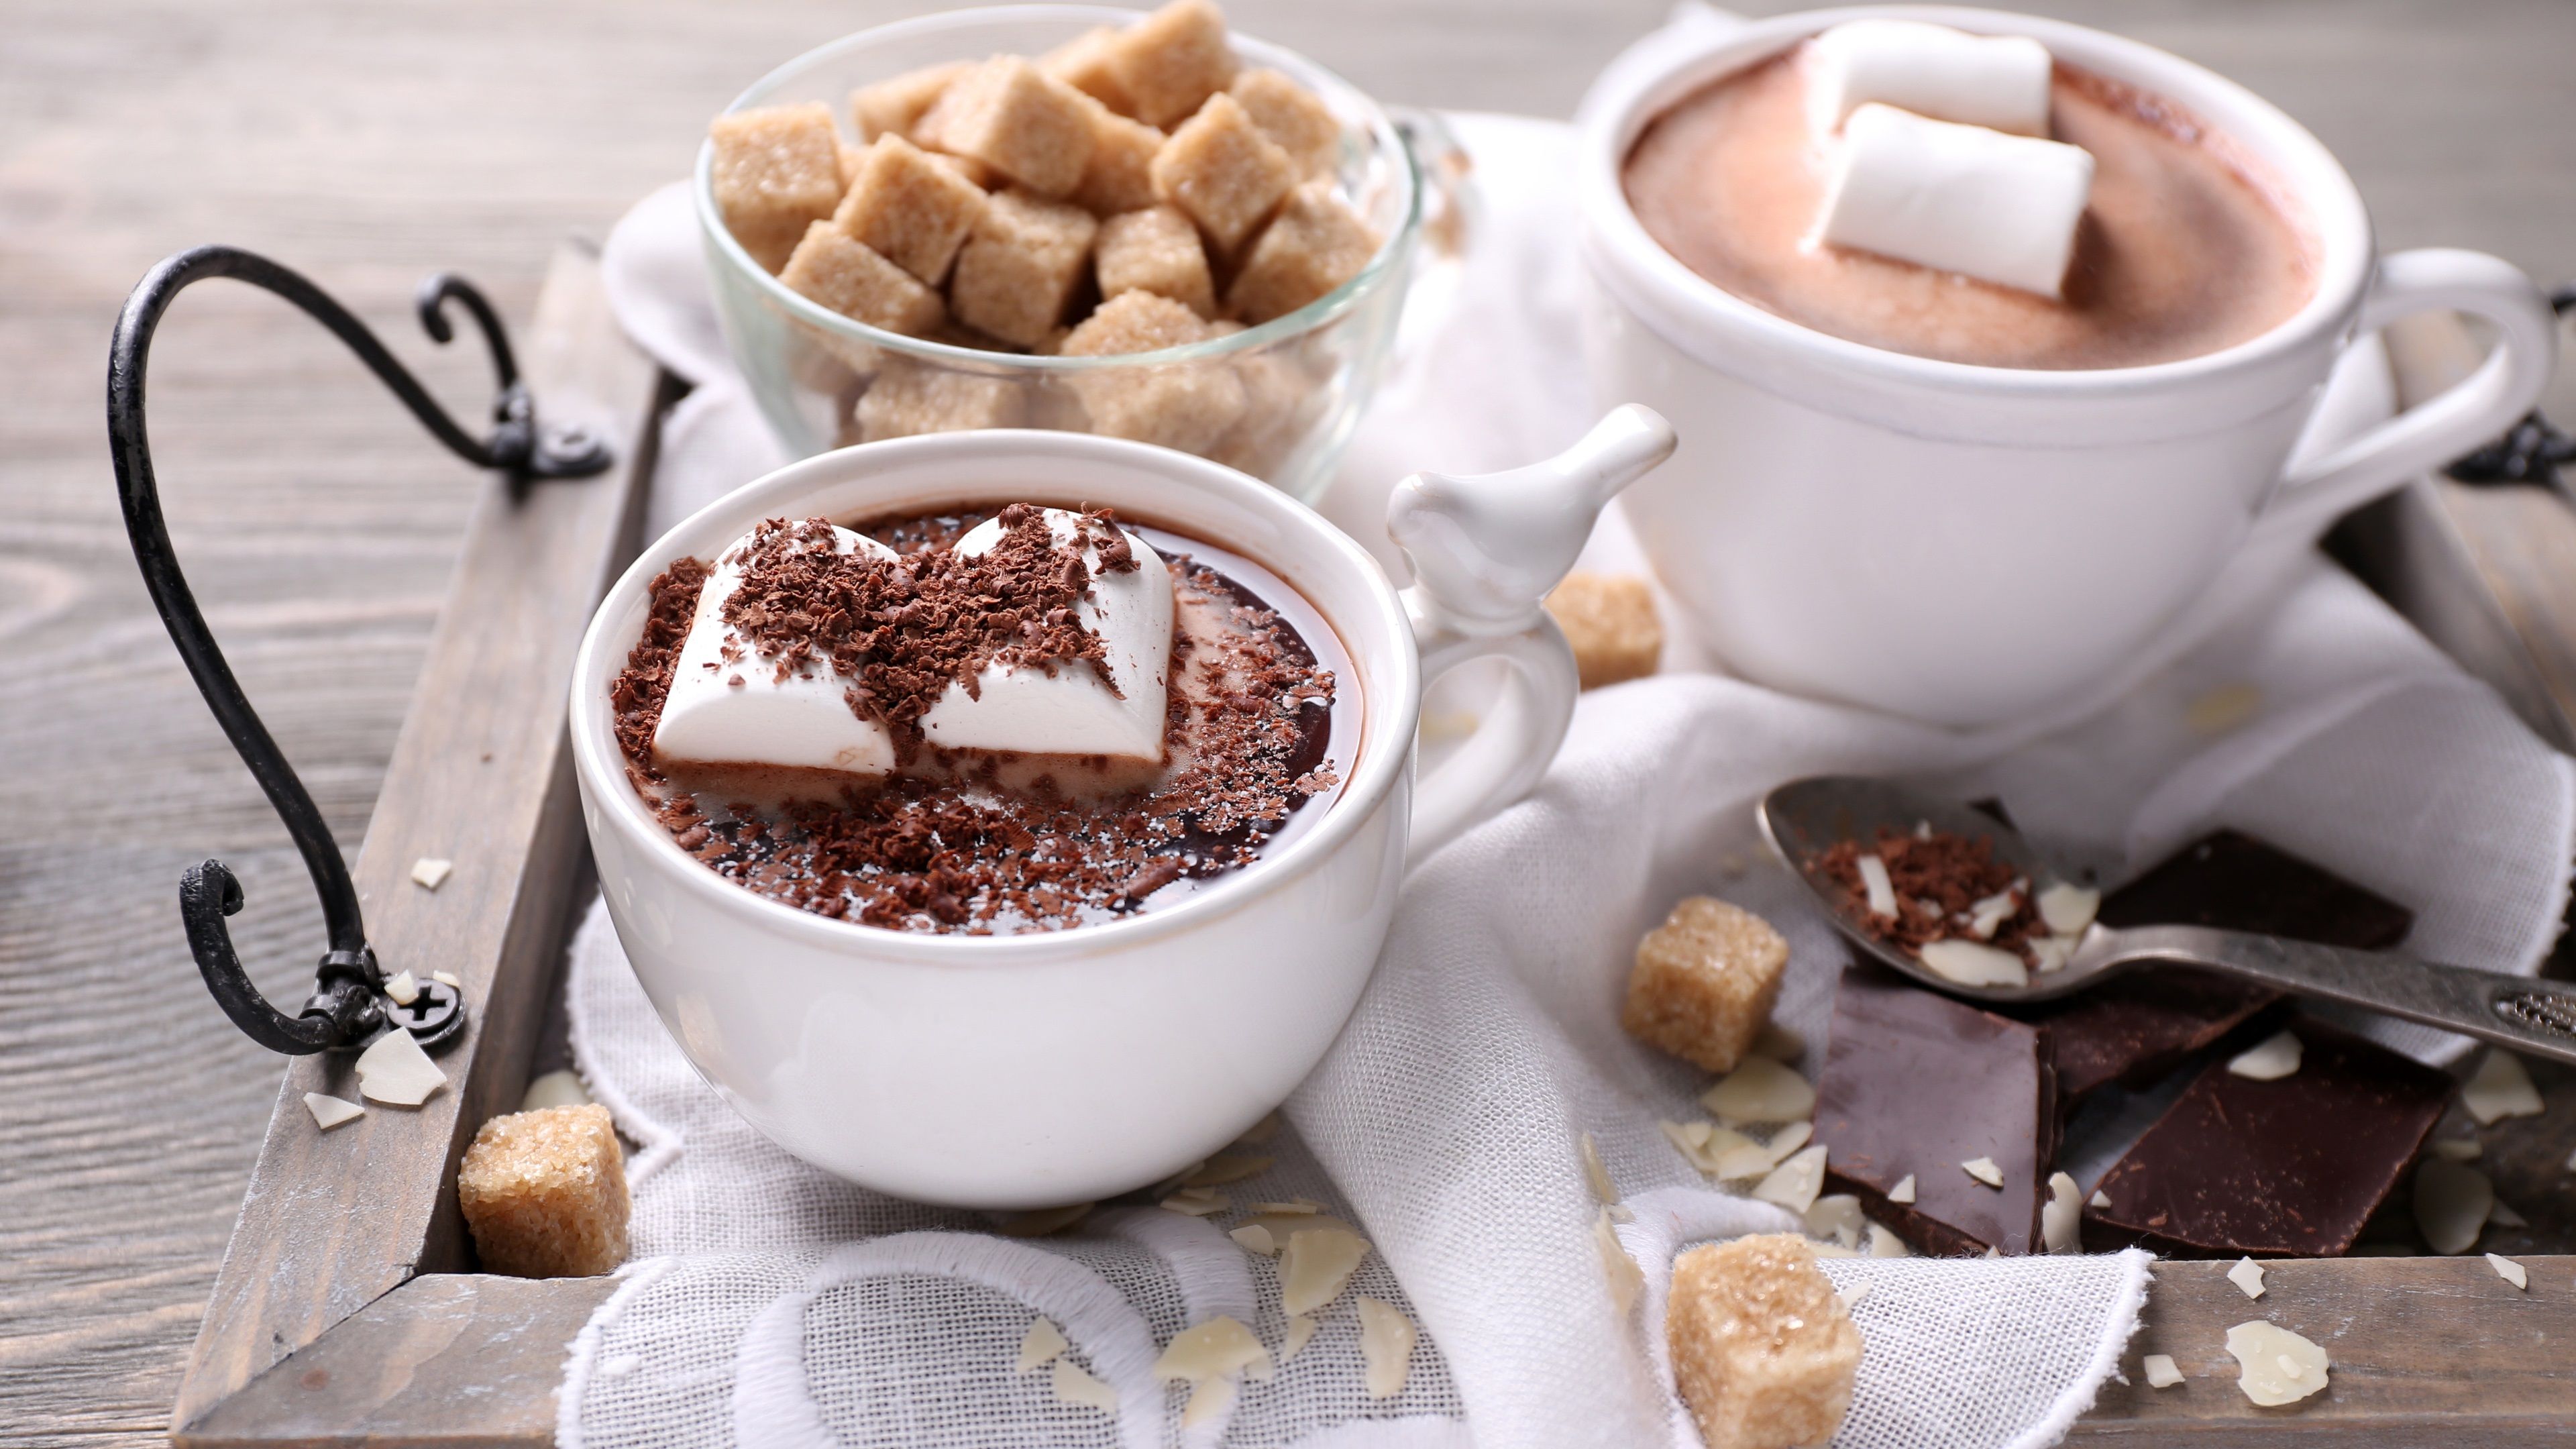 Wallpaper Hot chocolate drink, cup, marshmallow 3840x2160 UHD 4K Picture, Image